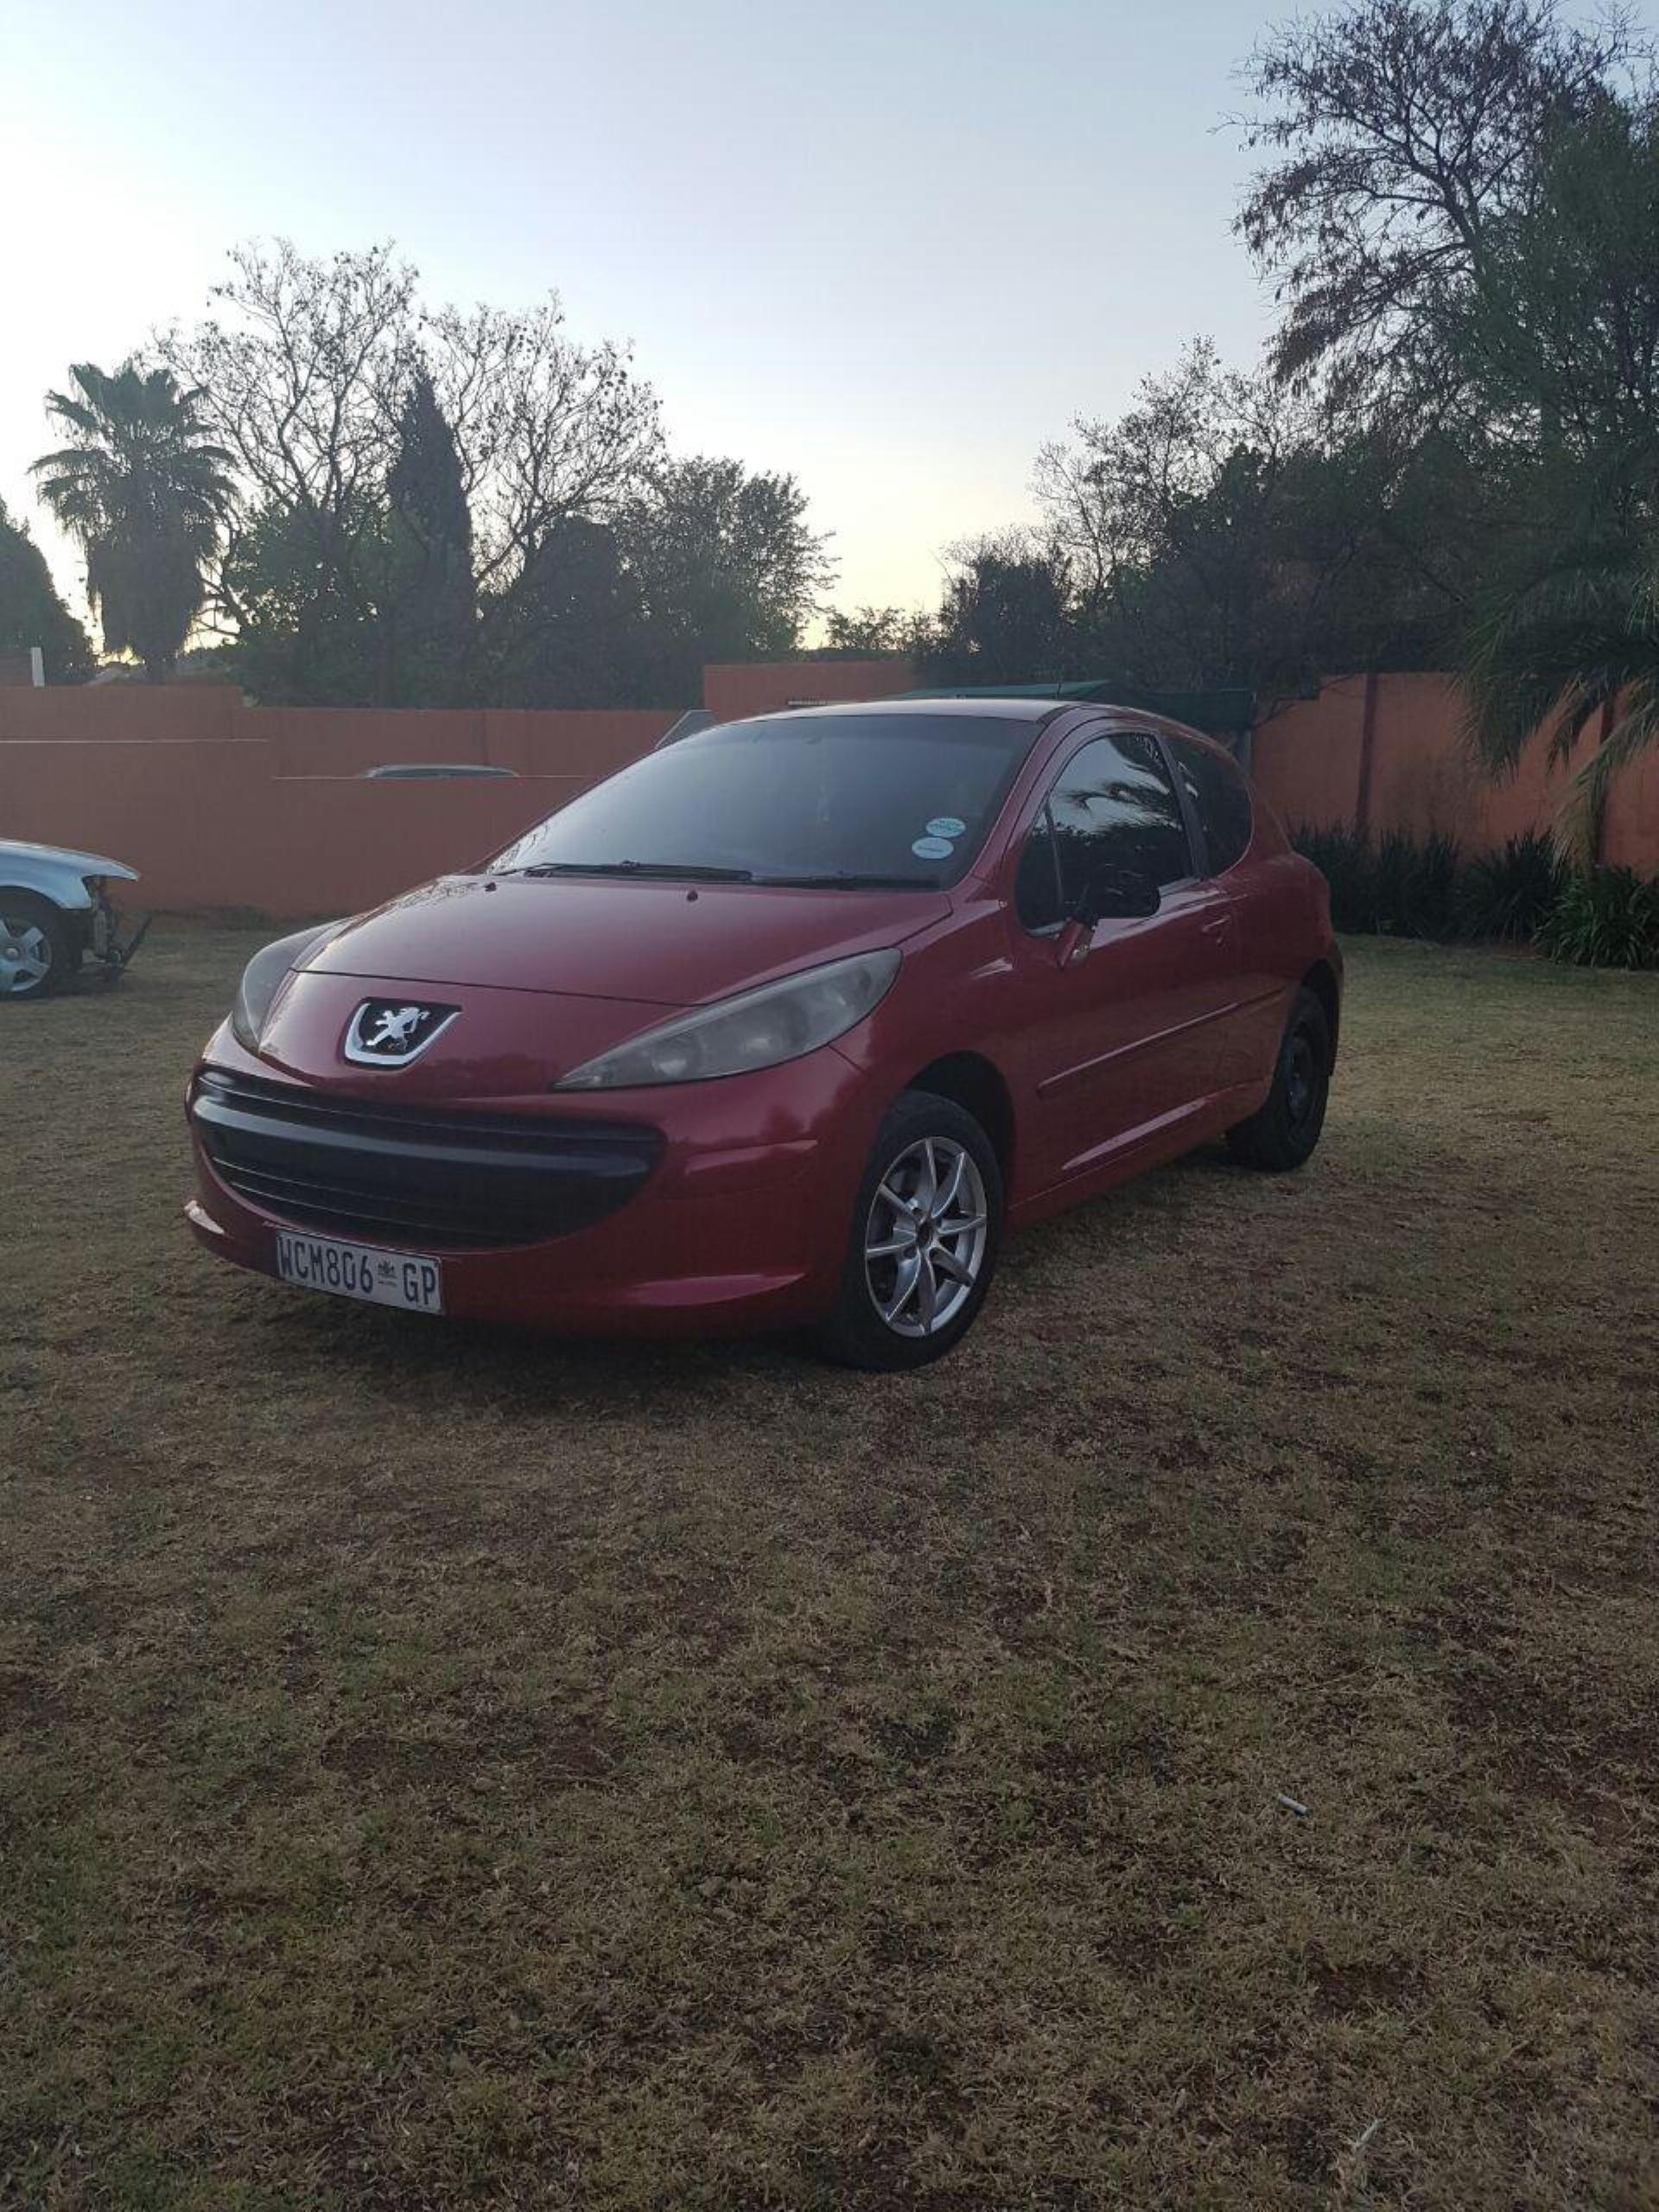 Peugeot 207 - Red